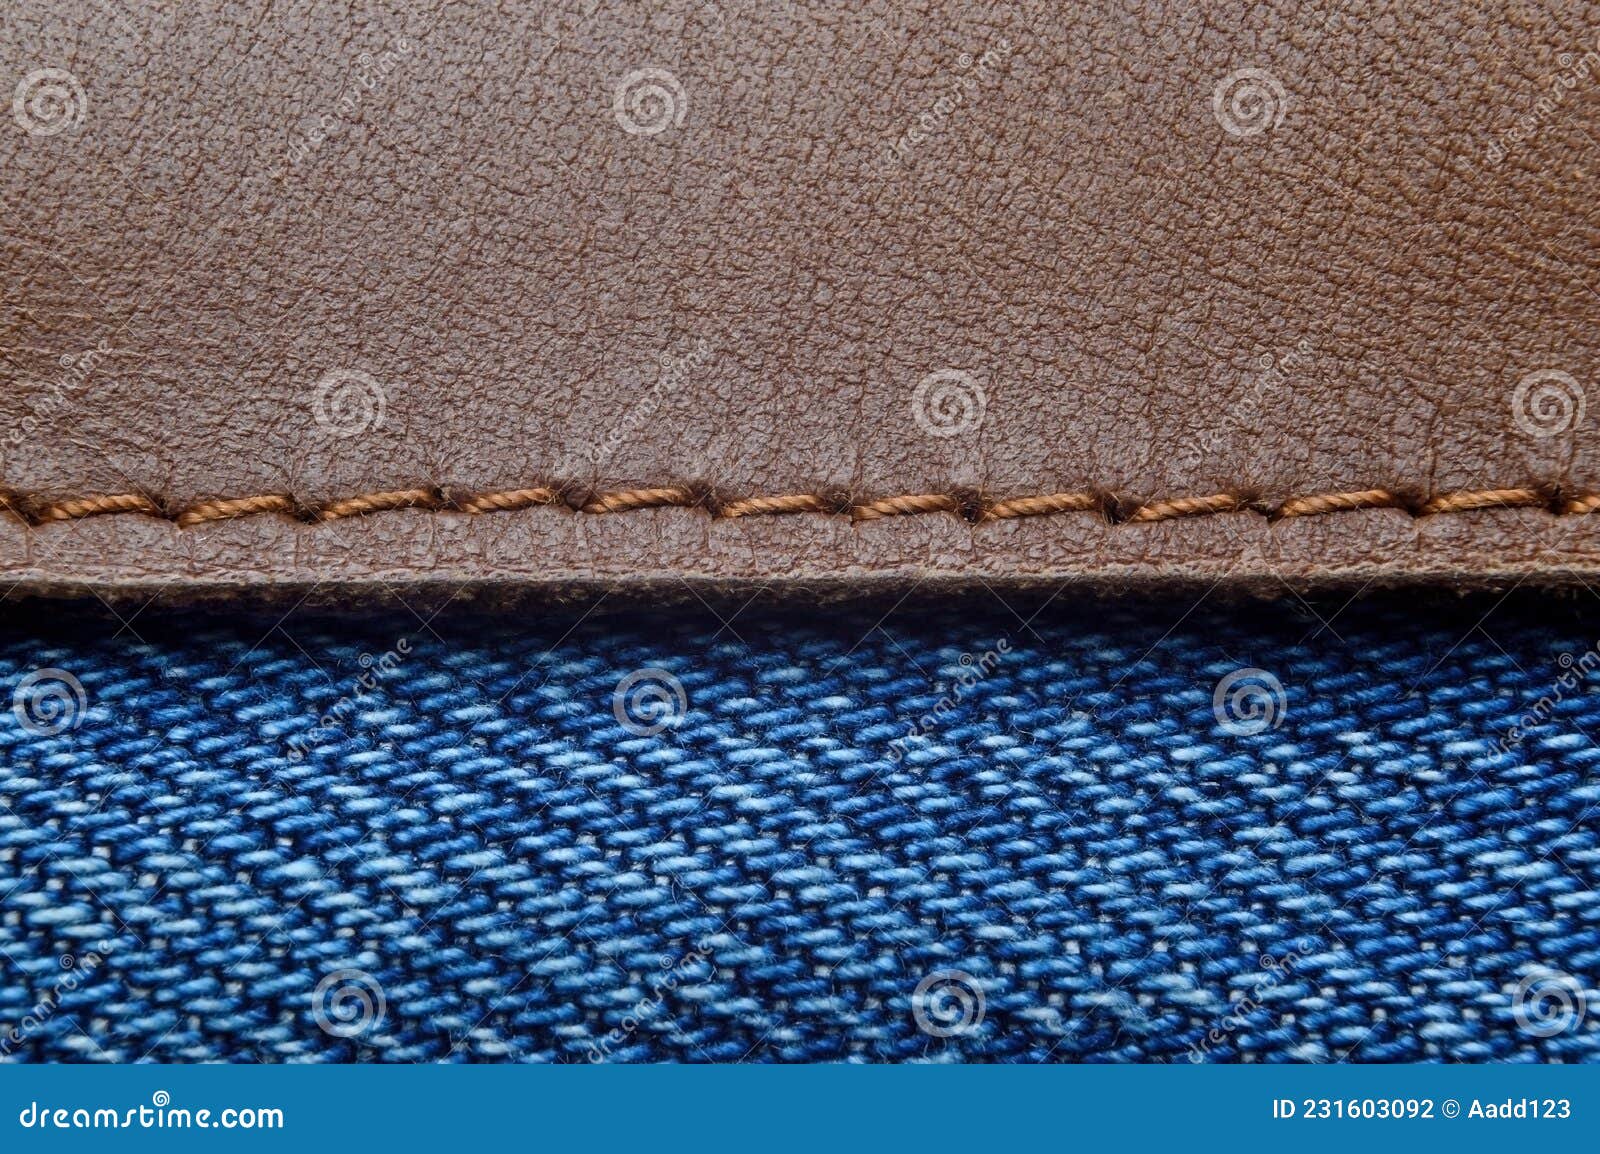 Leather Label on Blue Jeans. Close Up Stock Photo - Image of background ...